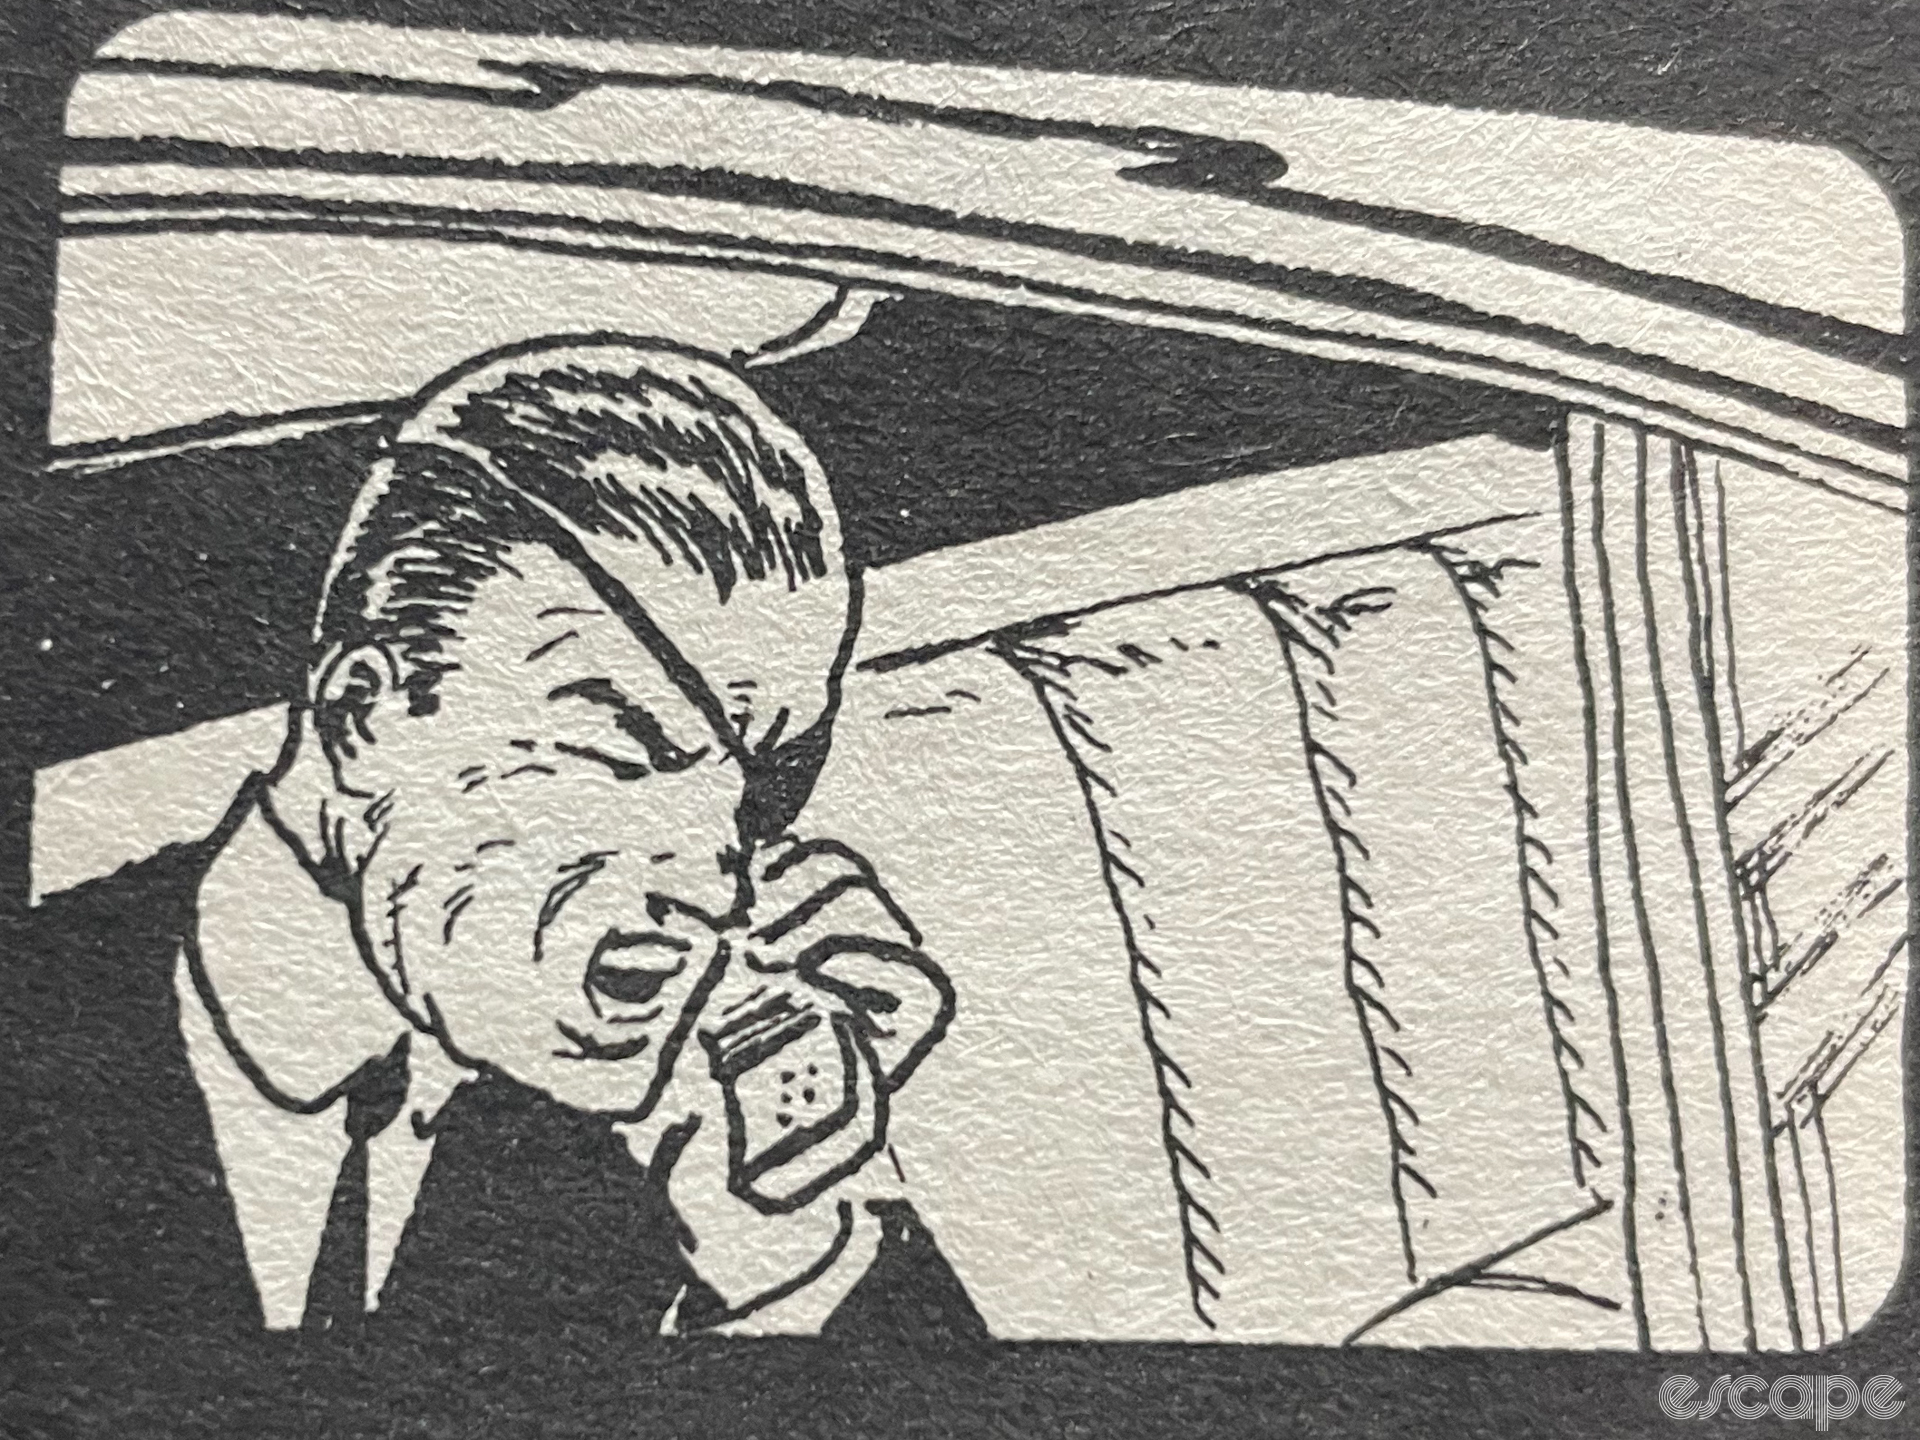 A photo of an illustration in a book of a man with an eyepatch yellowing into a mobile phone from within a limo.